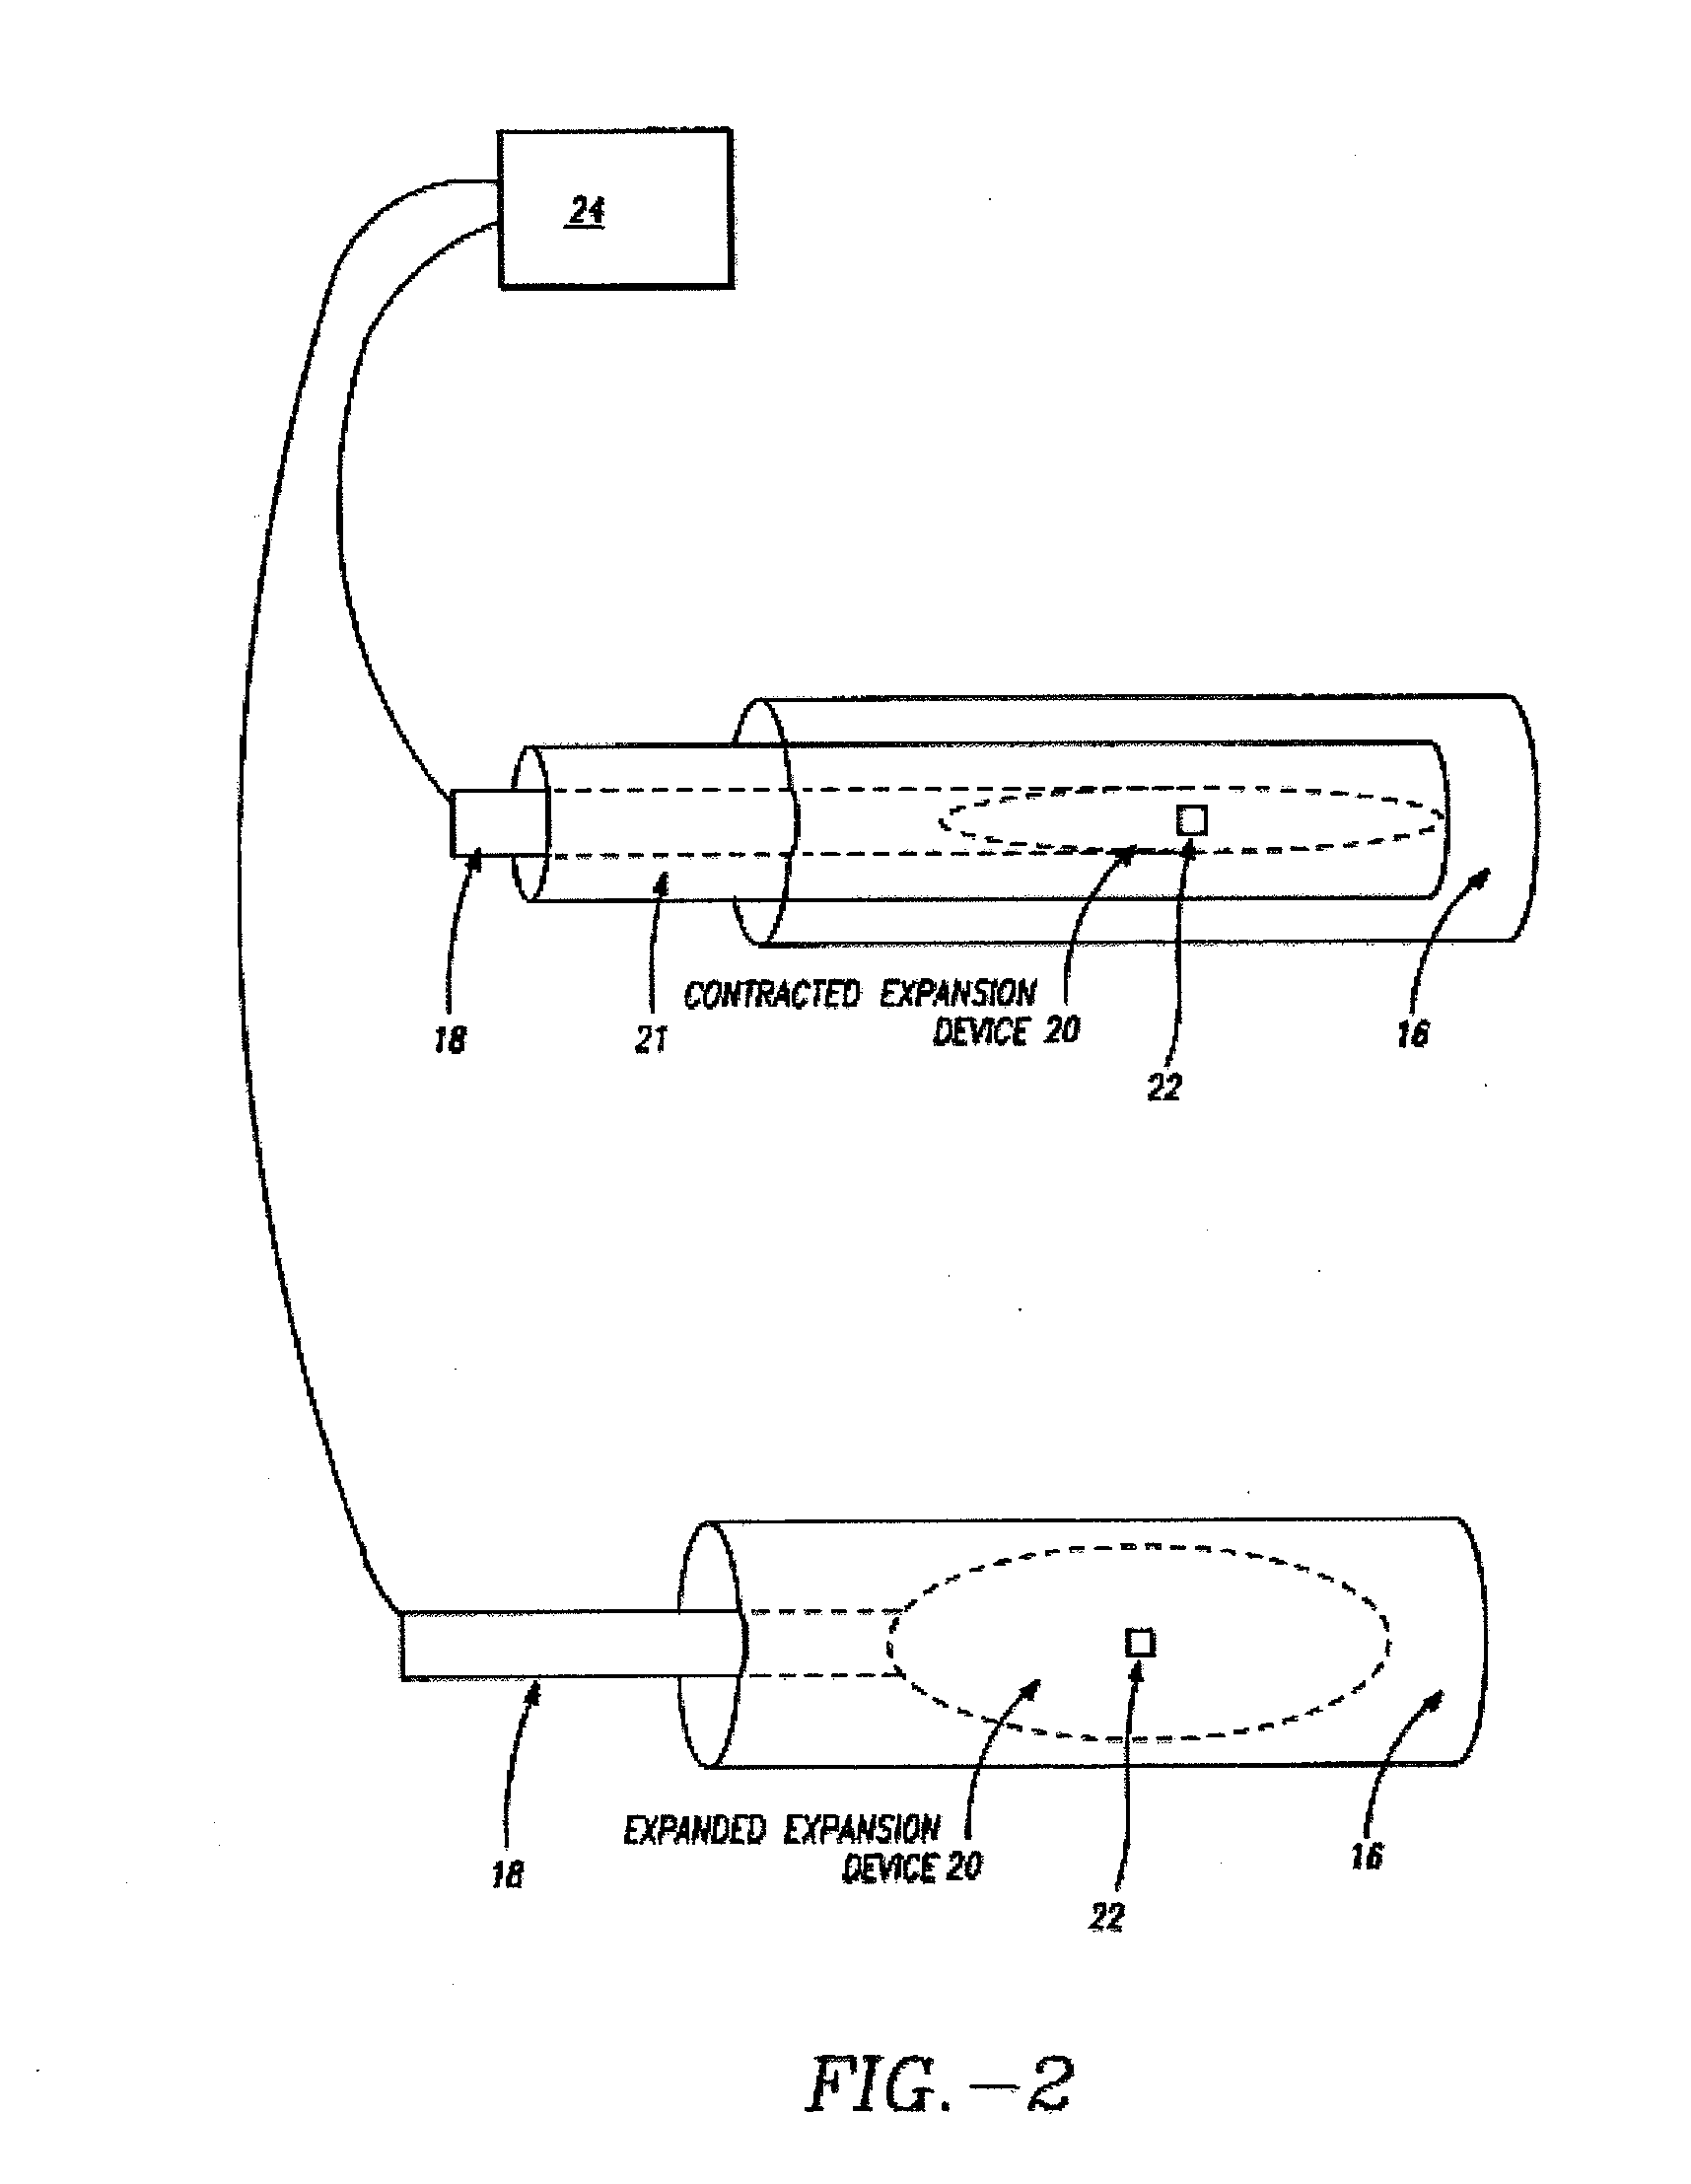 Methods and devices for treating urinary incontinence